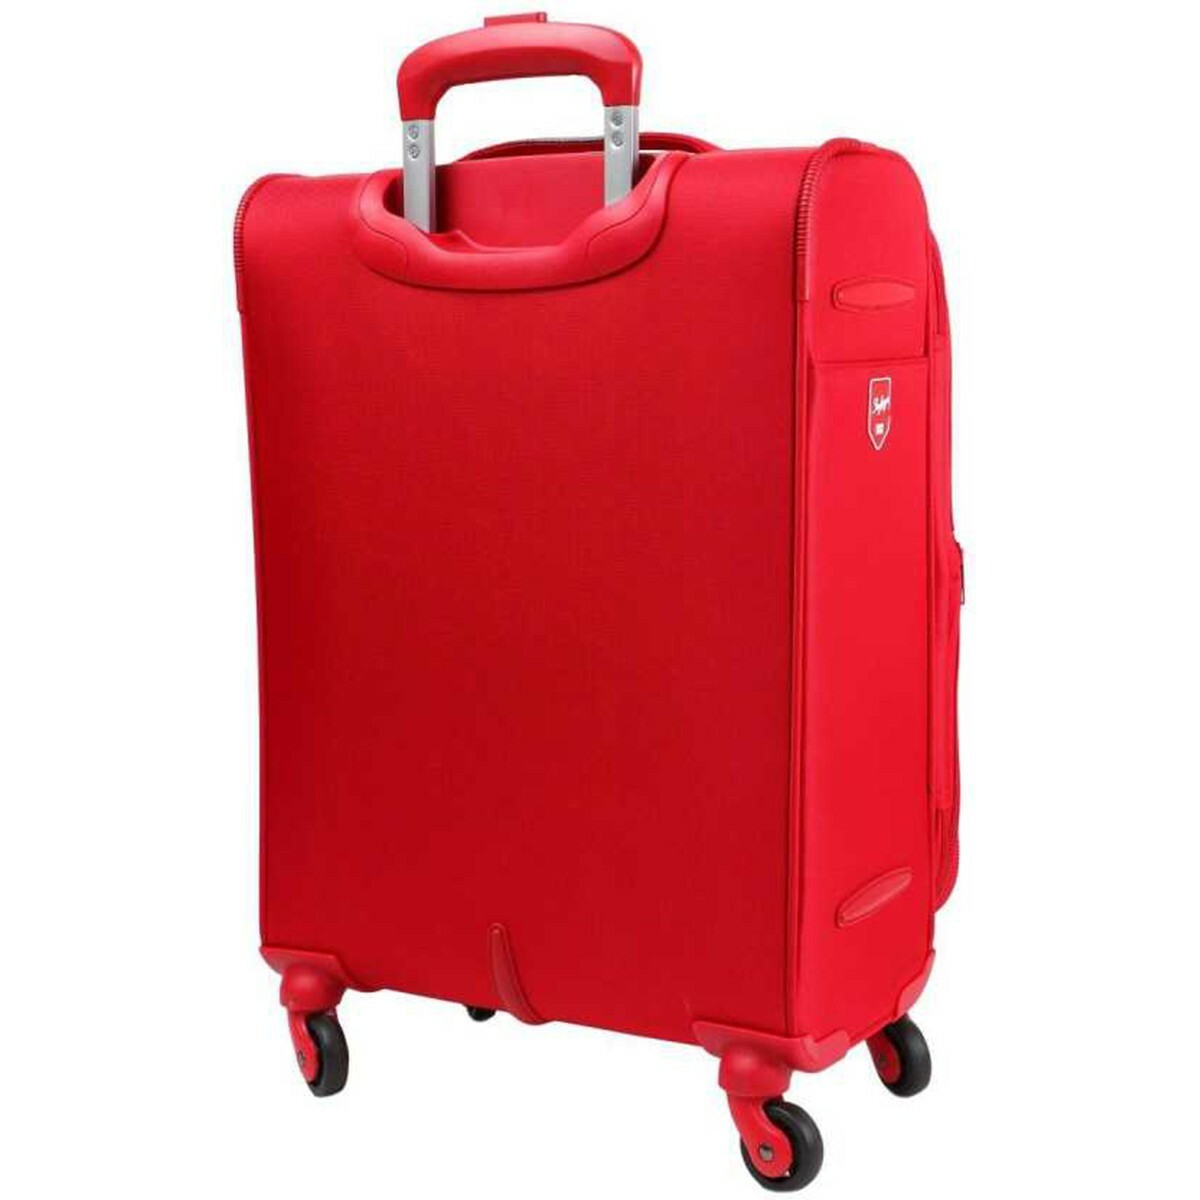 Skybags Spinner Reverb Plus 58cm Red